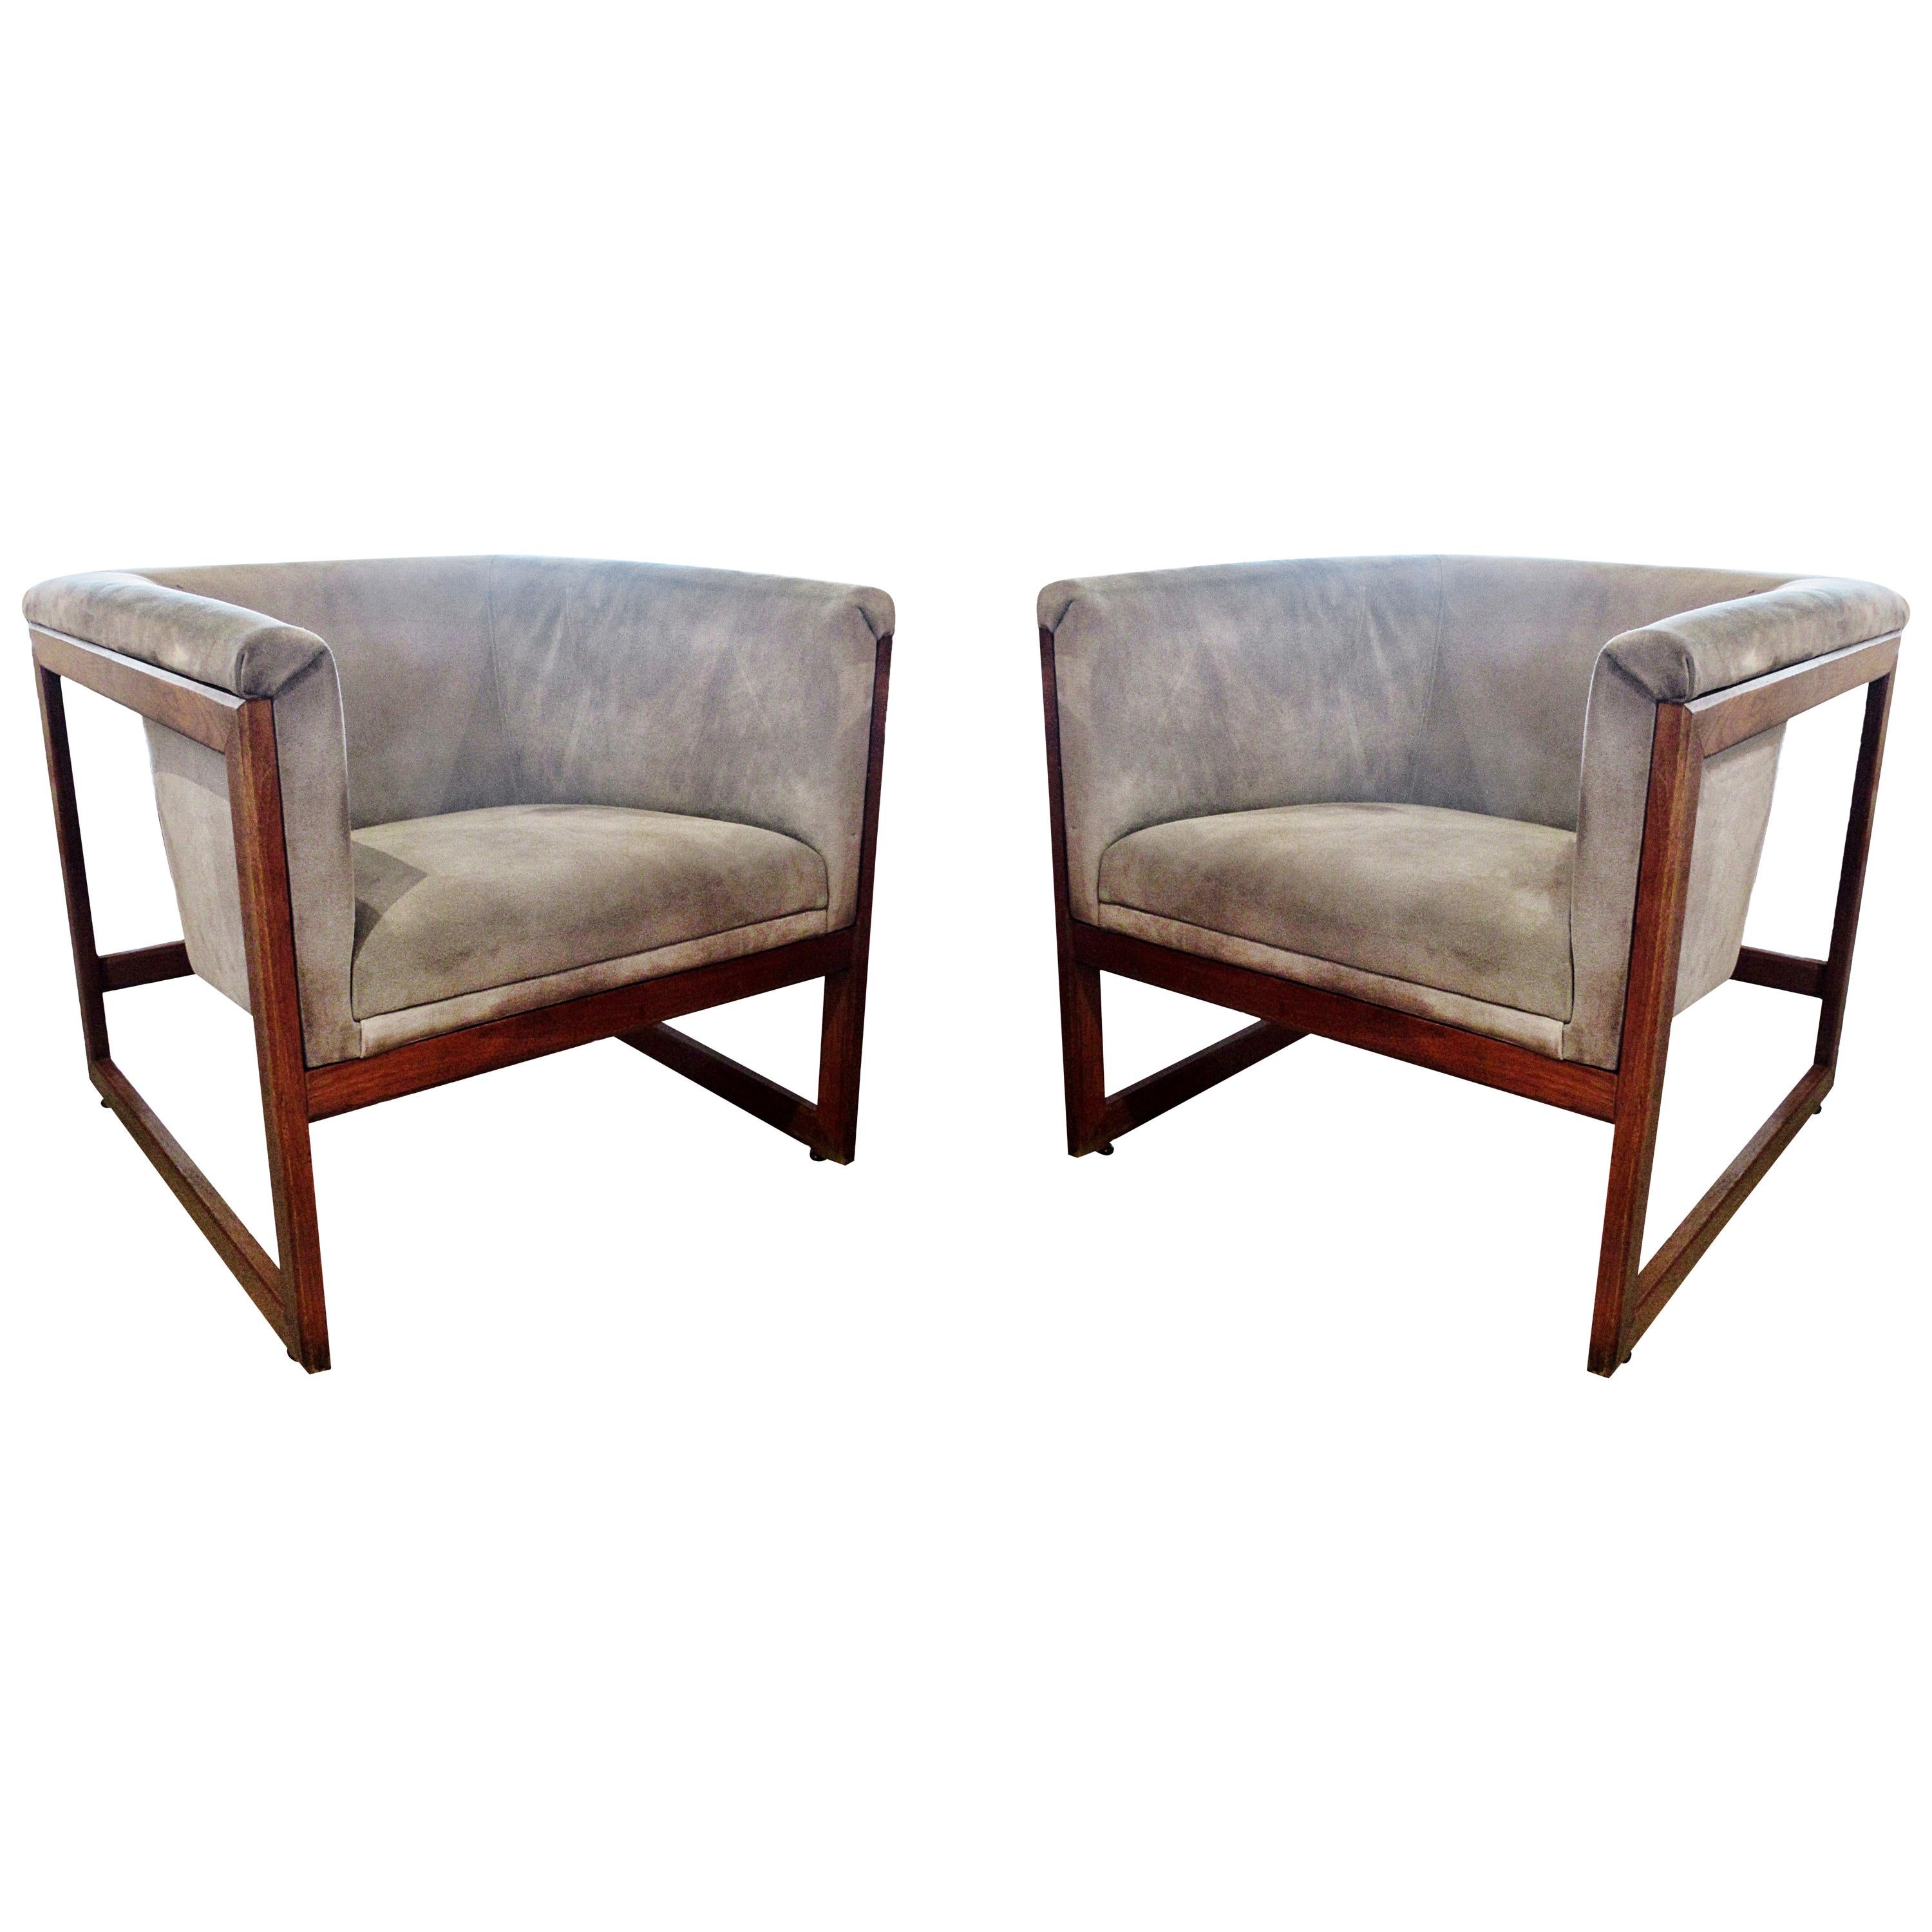 Pair of American Modern Walnut and Upholstered Armchairs